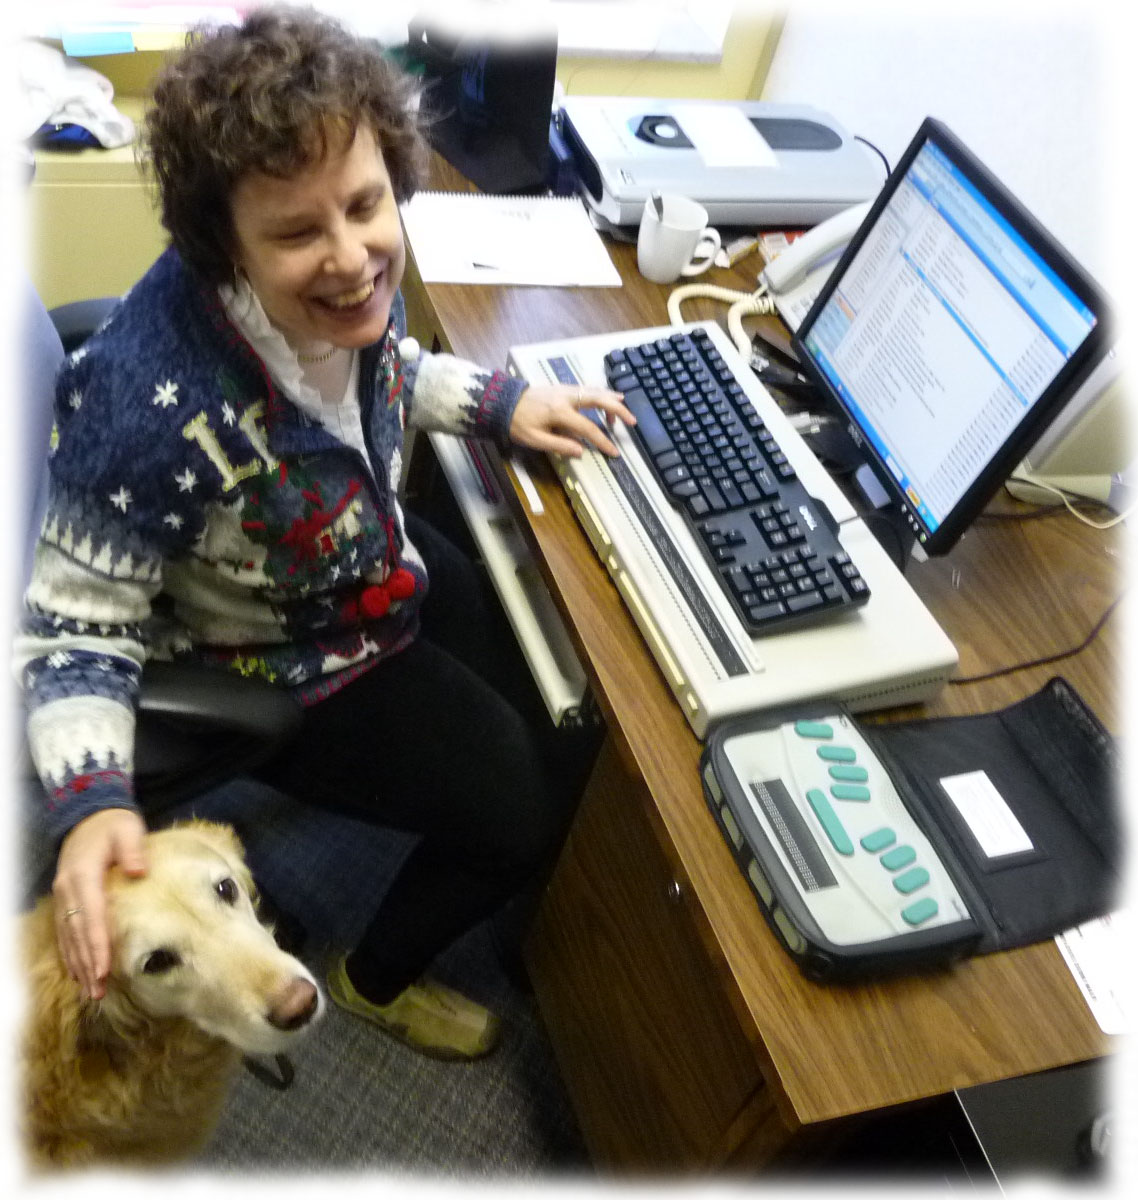 Kim working at her desk with her guide dog